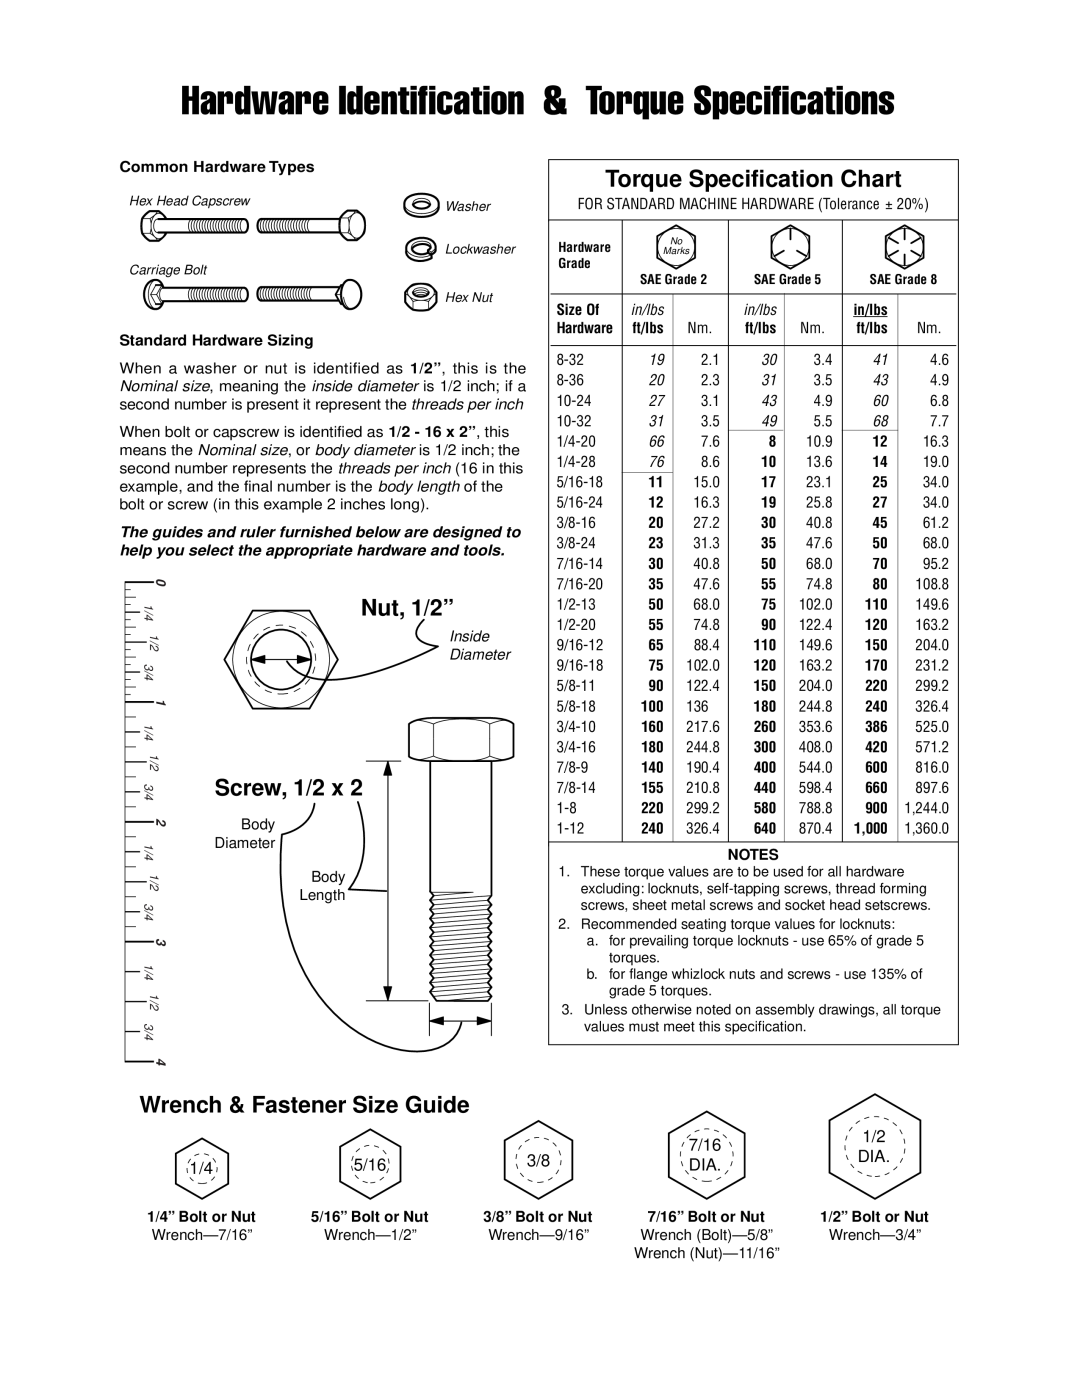 Simplicity 520 Wrench & Fastener Size Guide, 7/16, 5/16, Hardware Identification & Torque Specifications, Nut, 1/2”, Notes 